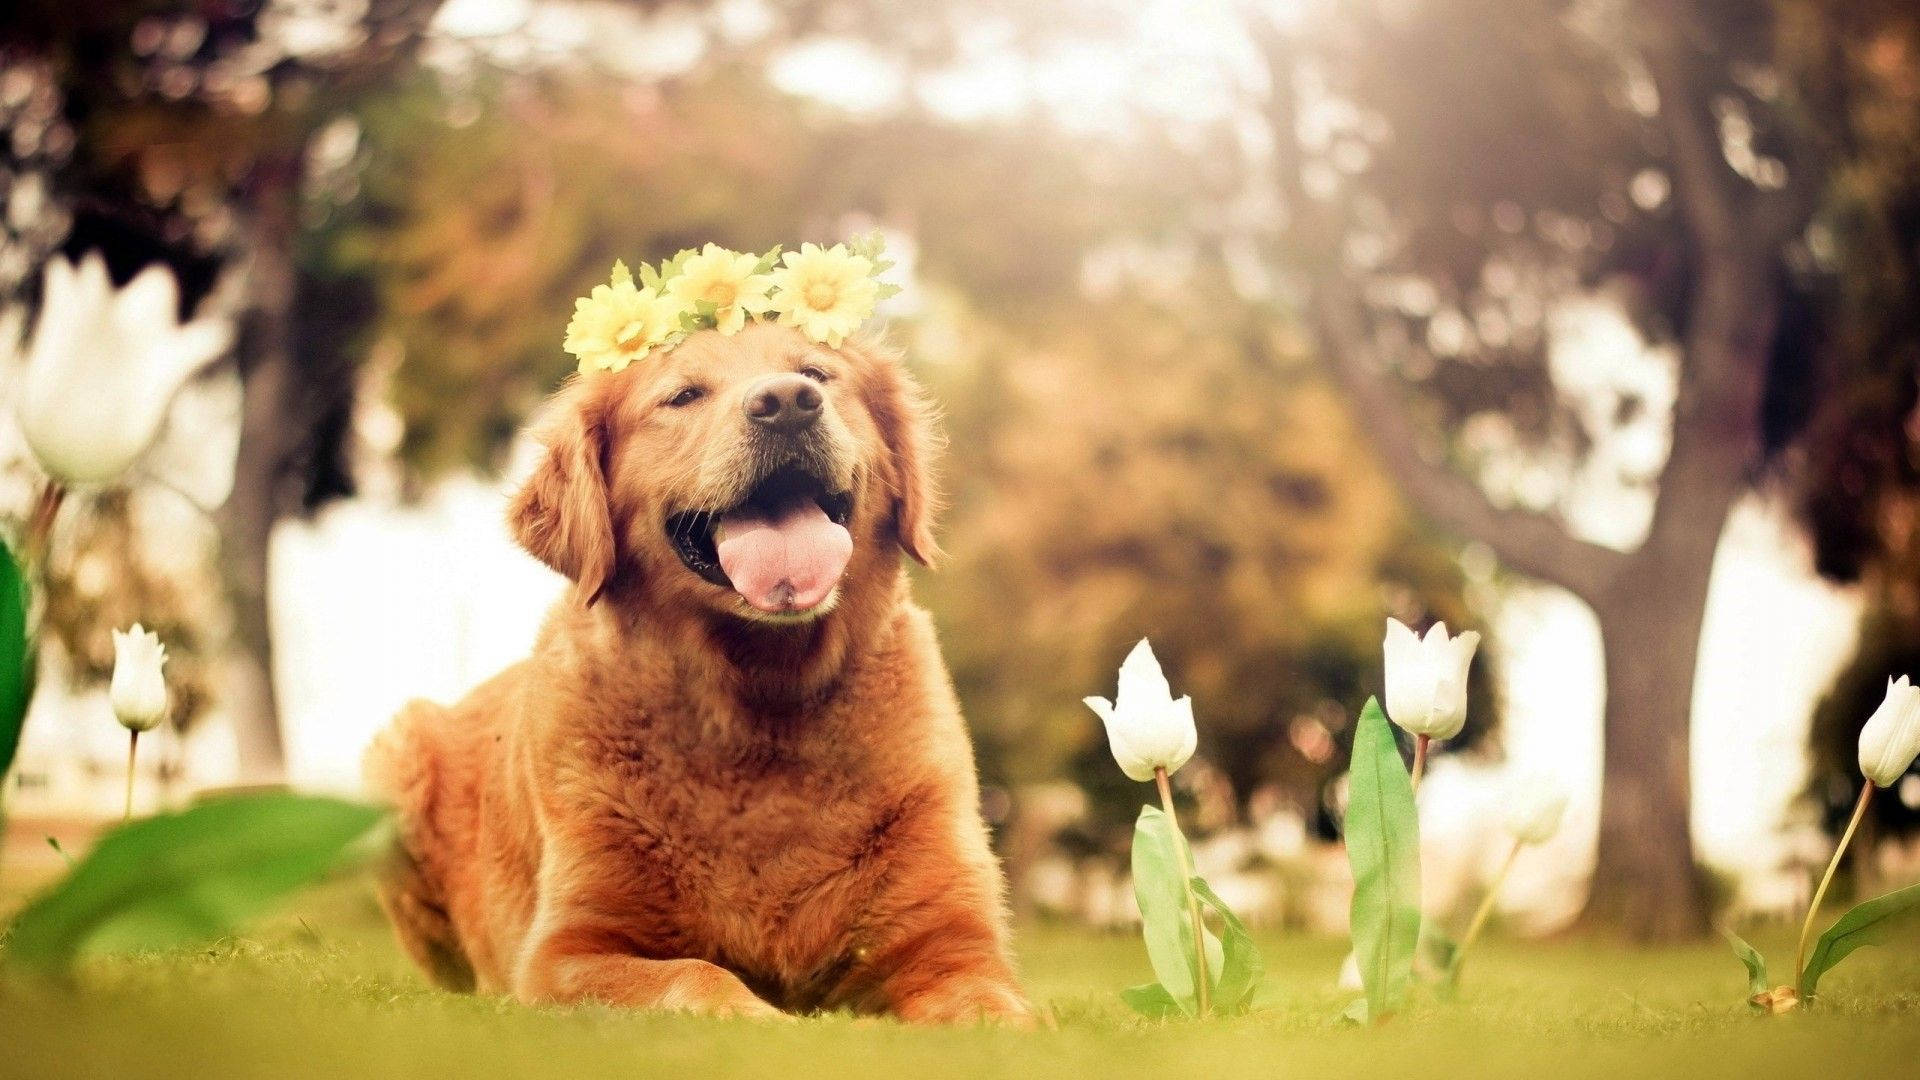 Dog With A Cute Smile Wallpaper